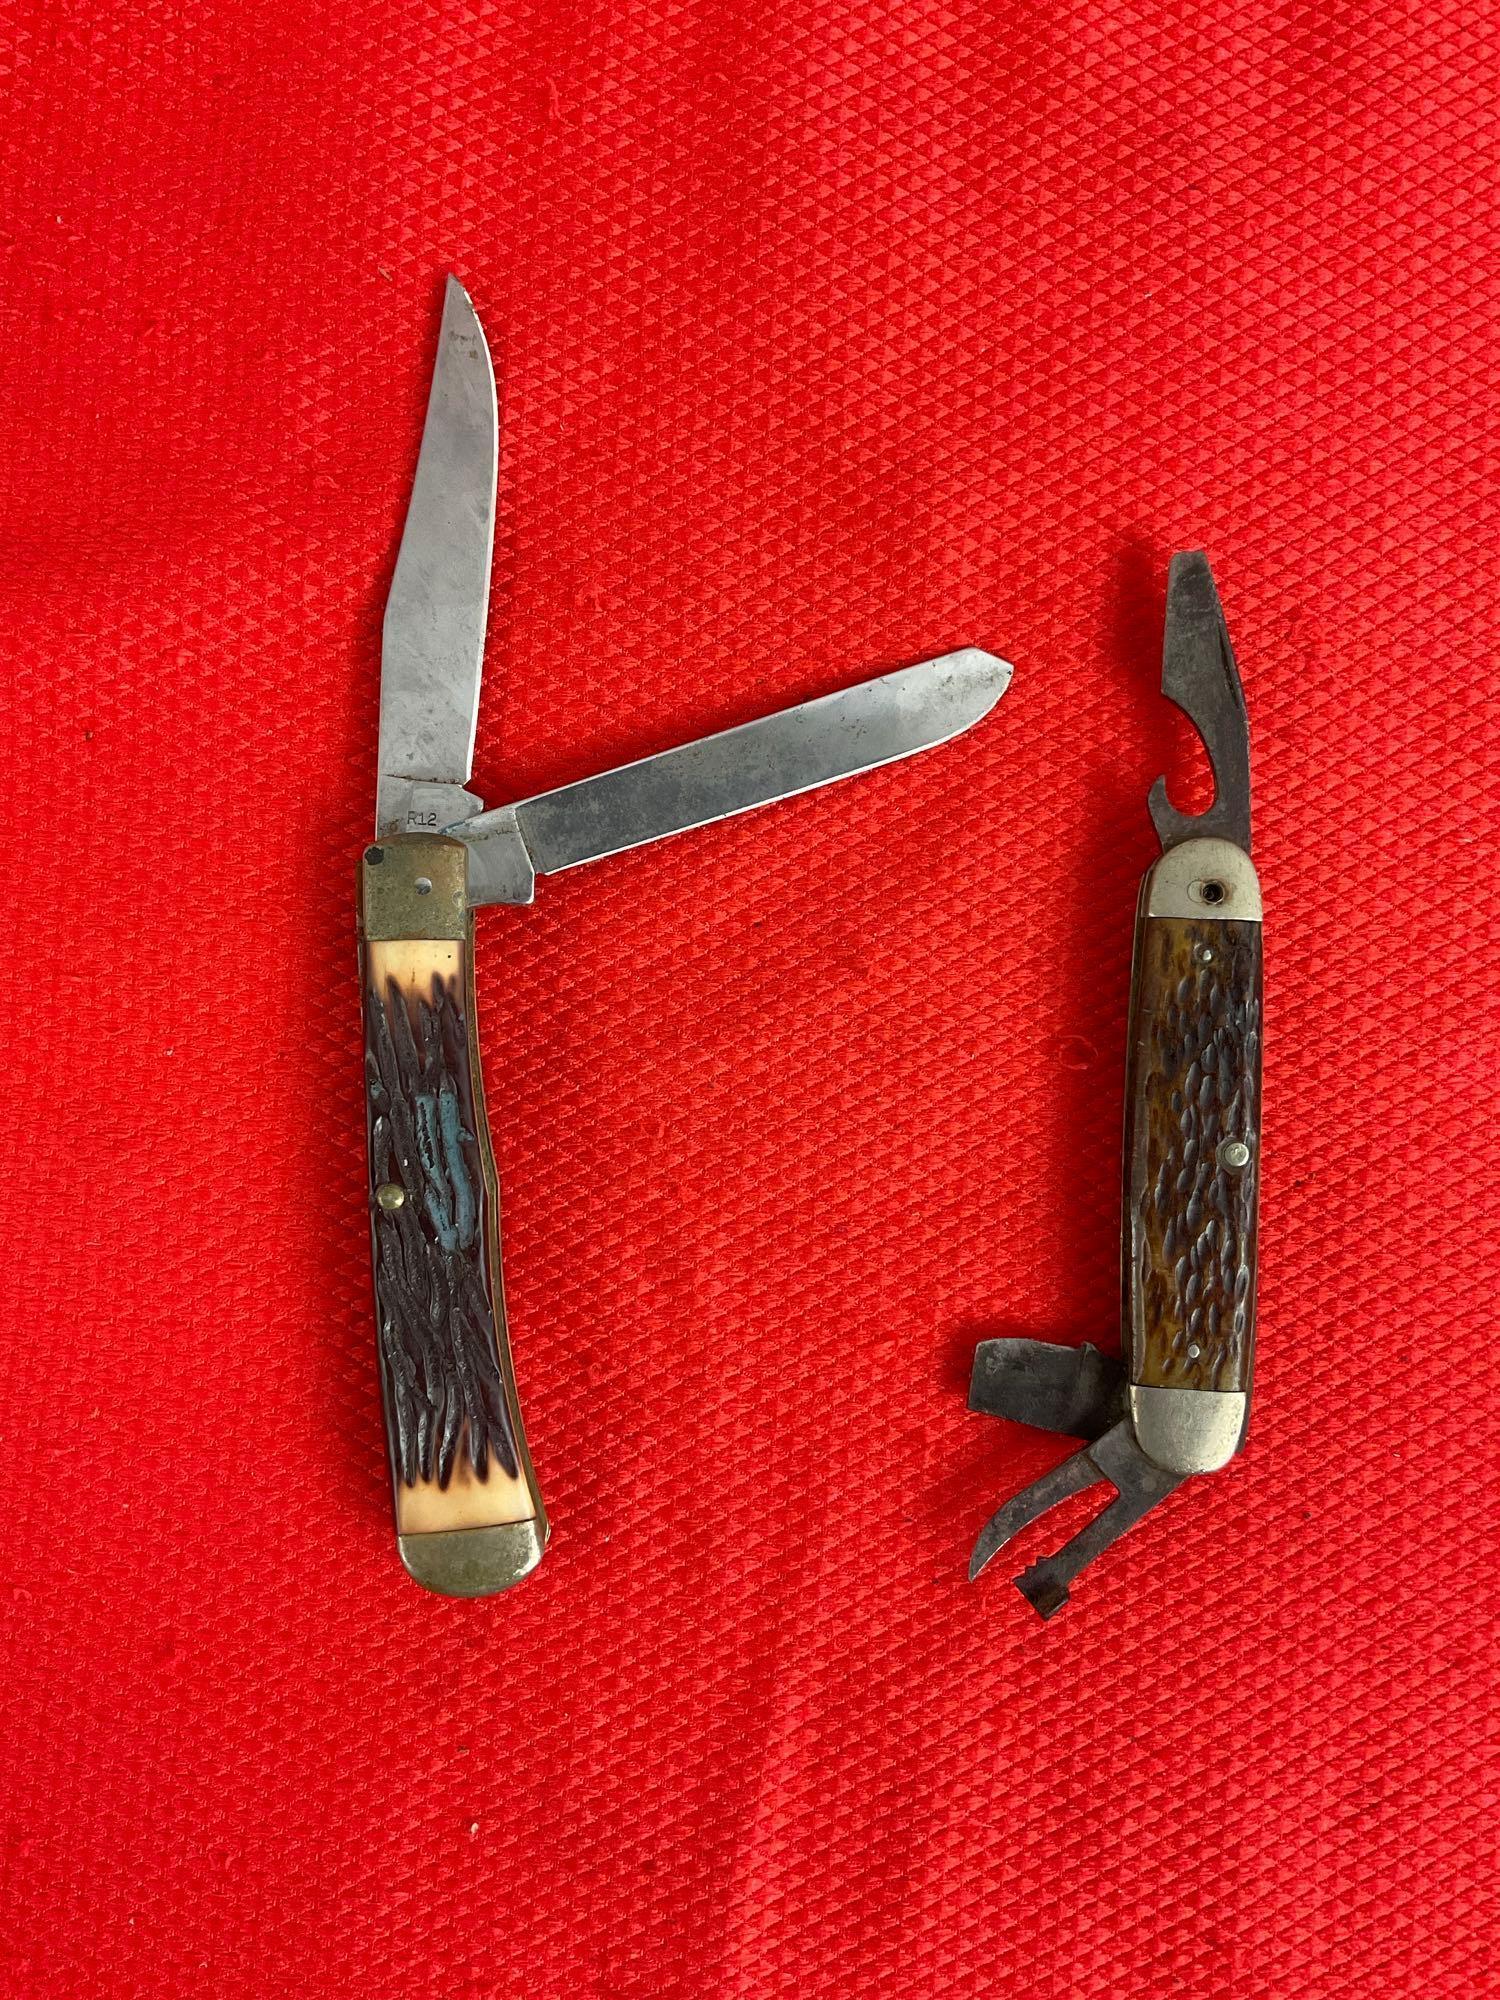 2 pcs Vintage Remington Steel Folding Knives Models R12 & Unnumbered Boy Scout Knife. As Is. See